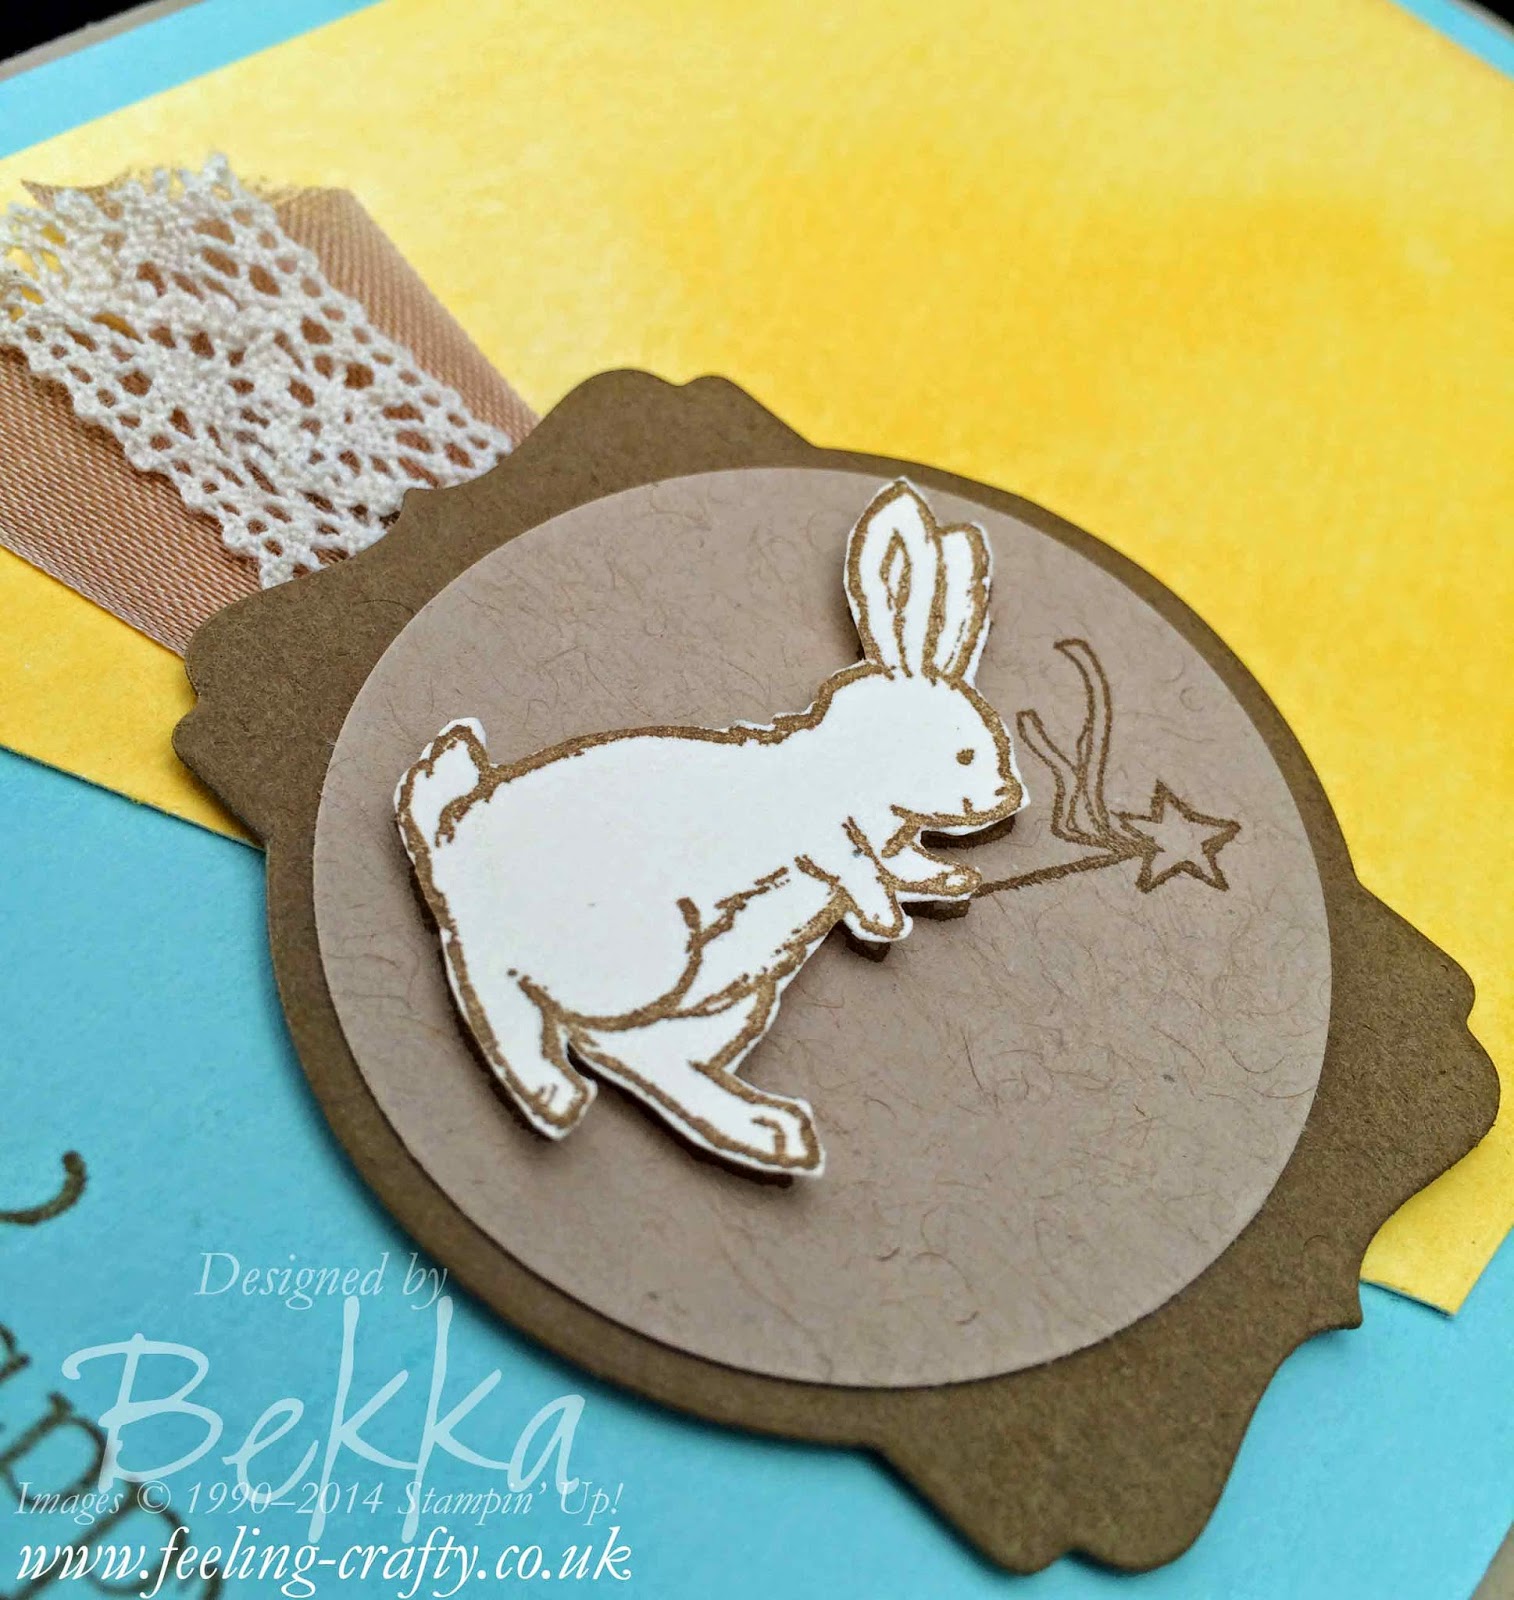 Storybook Friends Easter Card by Stampin' Up! UK Independent Demonstrator Bekka - check out her blog for lots of great ideas